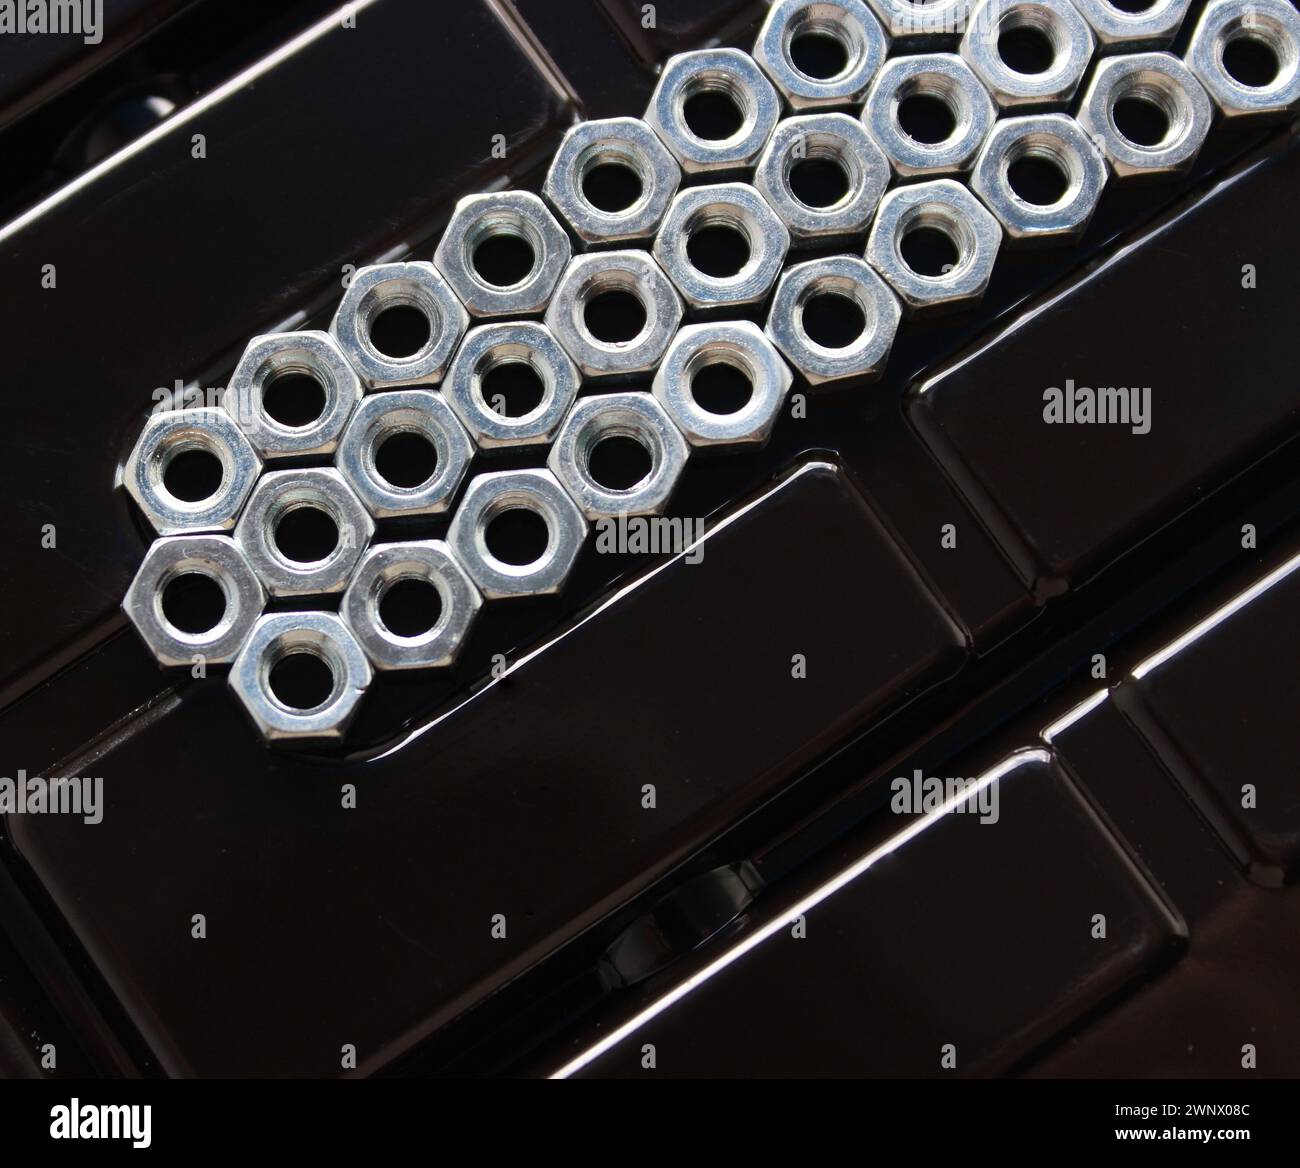 A compartment filled with iron nuts of the same diameter Stock Photo